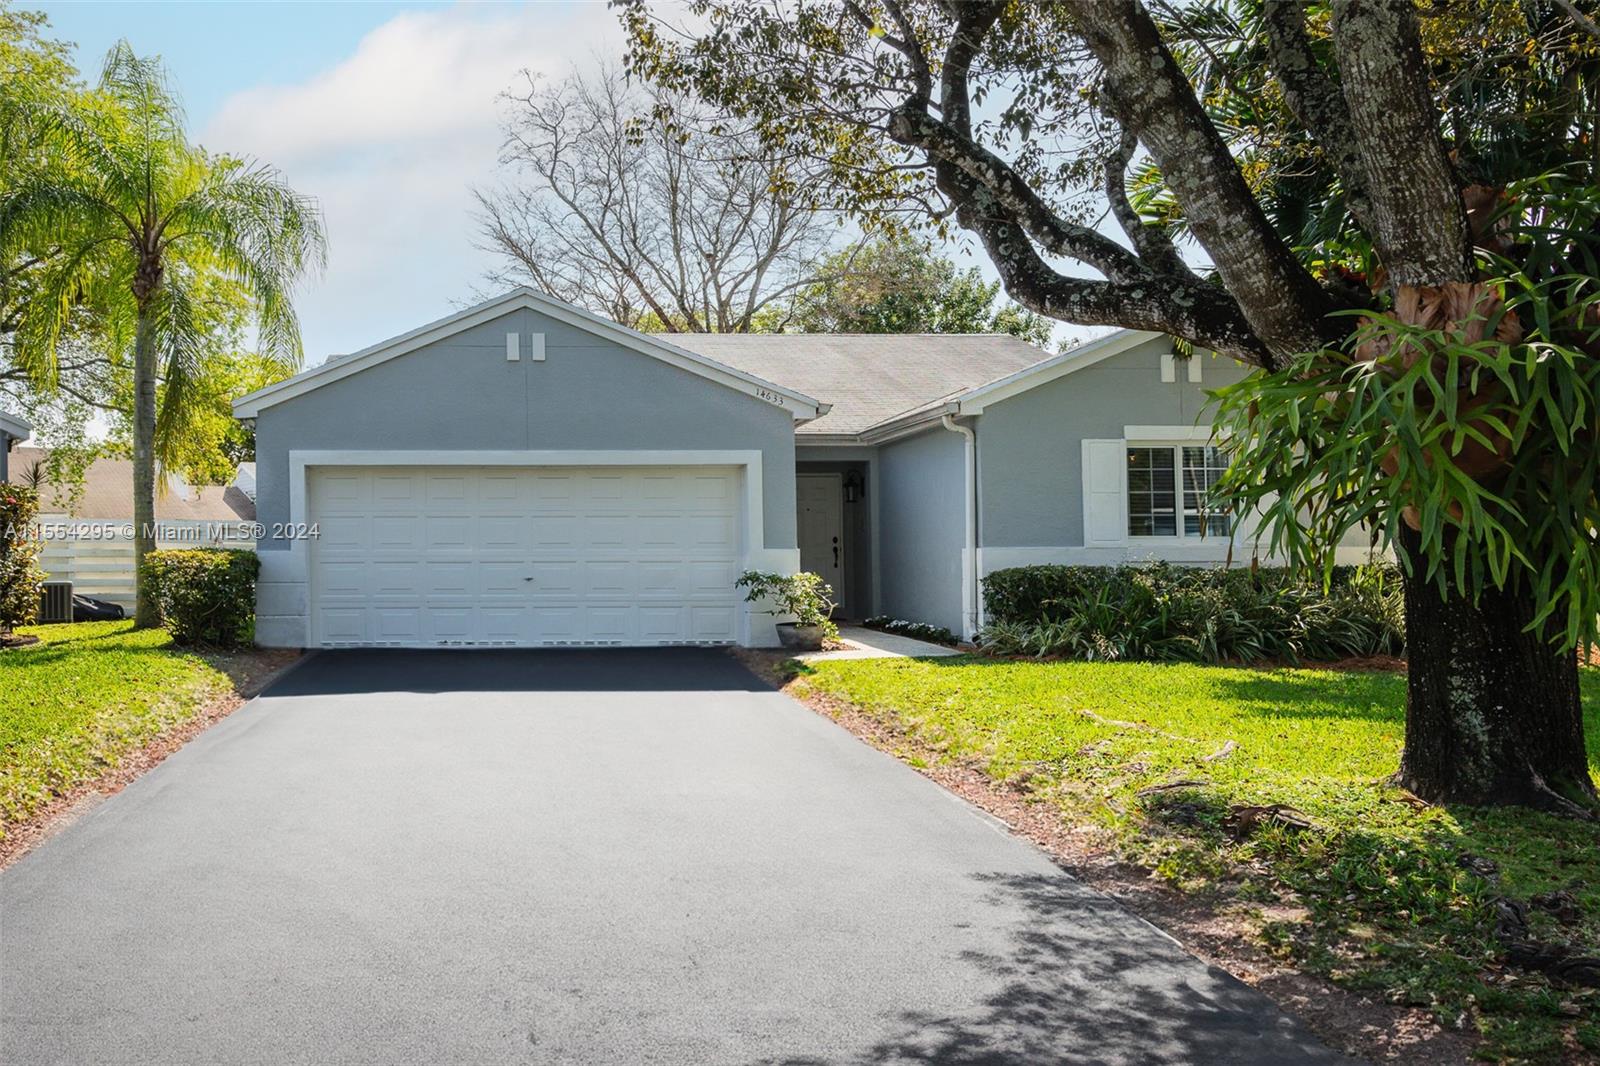 14633 SW 142nd Place Cir, Miami, Florida 33186, 3 Bedrooms Bedrooms, ,2 BathroomsBathrooms,Residential,For Sale,14633 SW 142nd Place Cir,A11554295